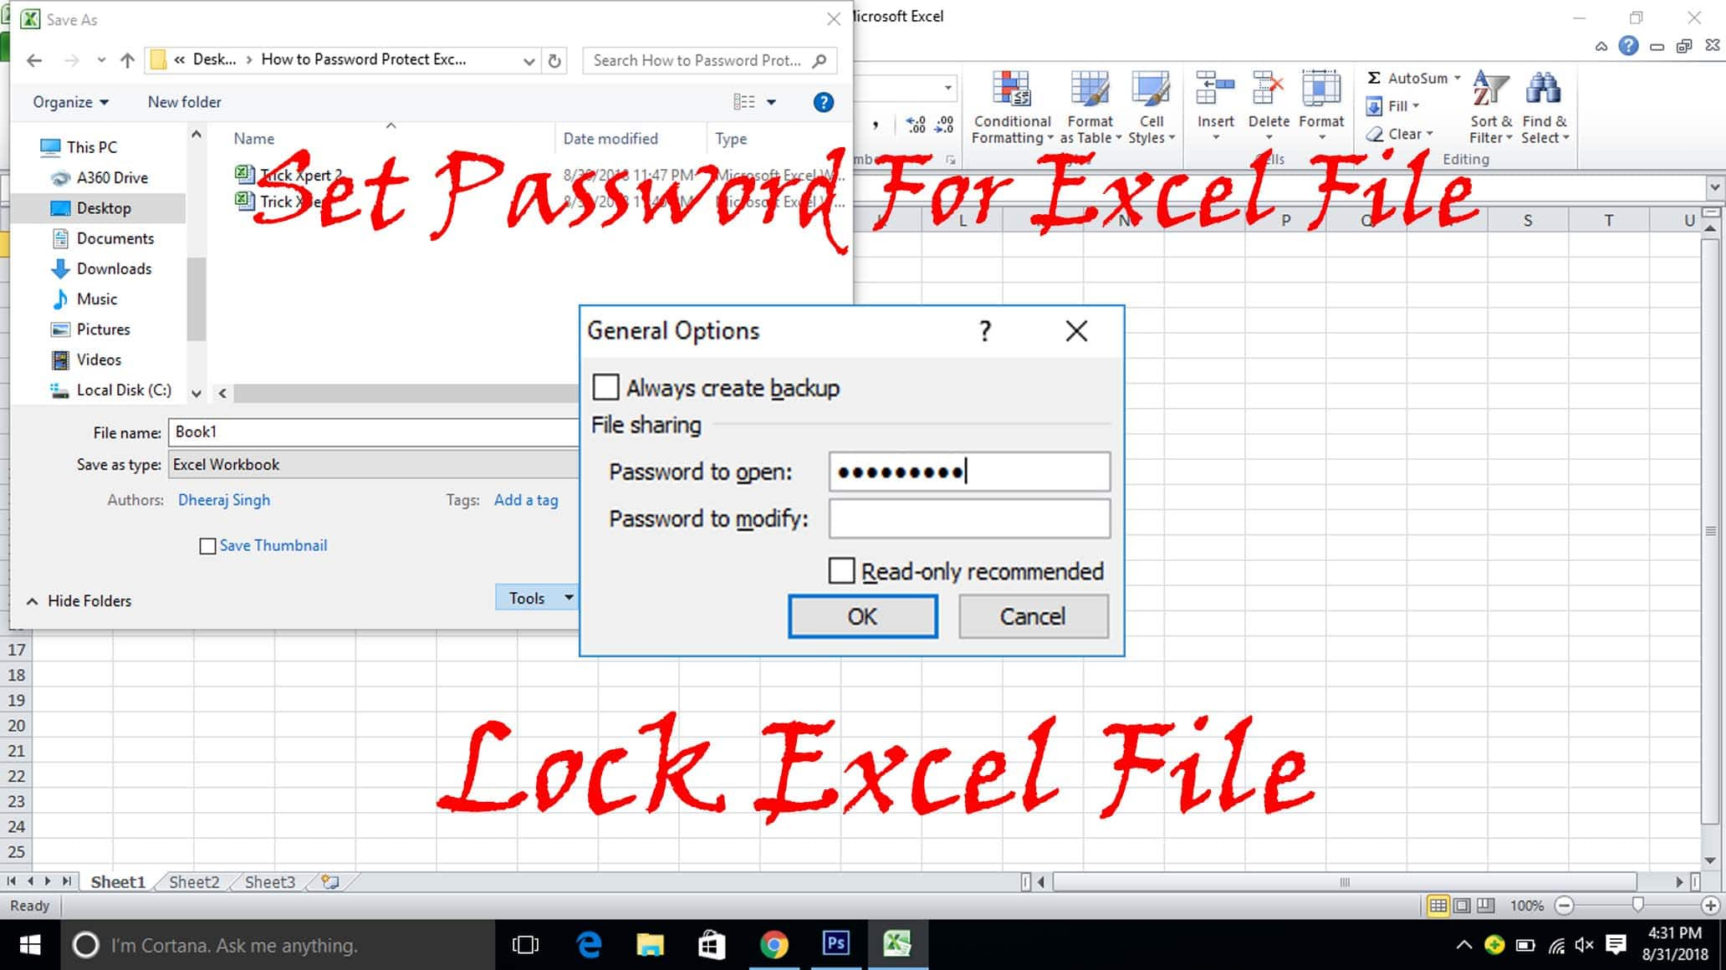 how-do-you-password-protect-an-excel-spreadsheet-in-how-to-password-protect-excel-file-3-methods